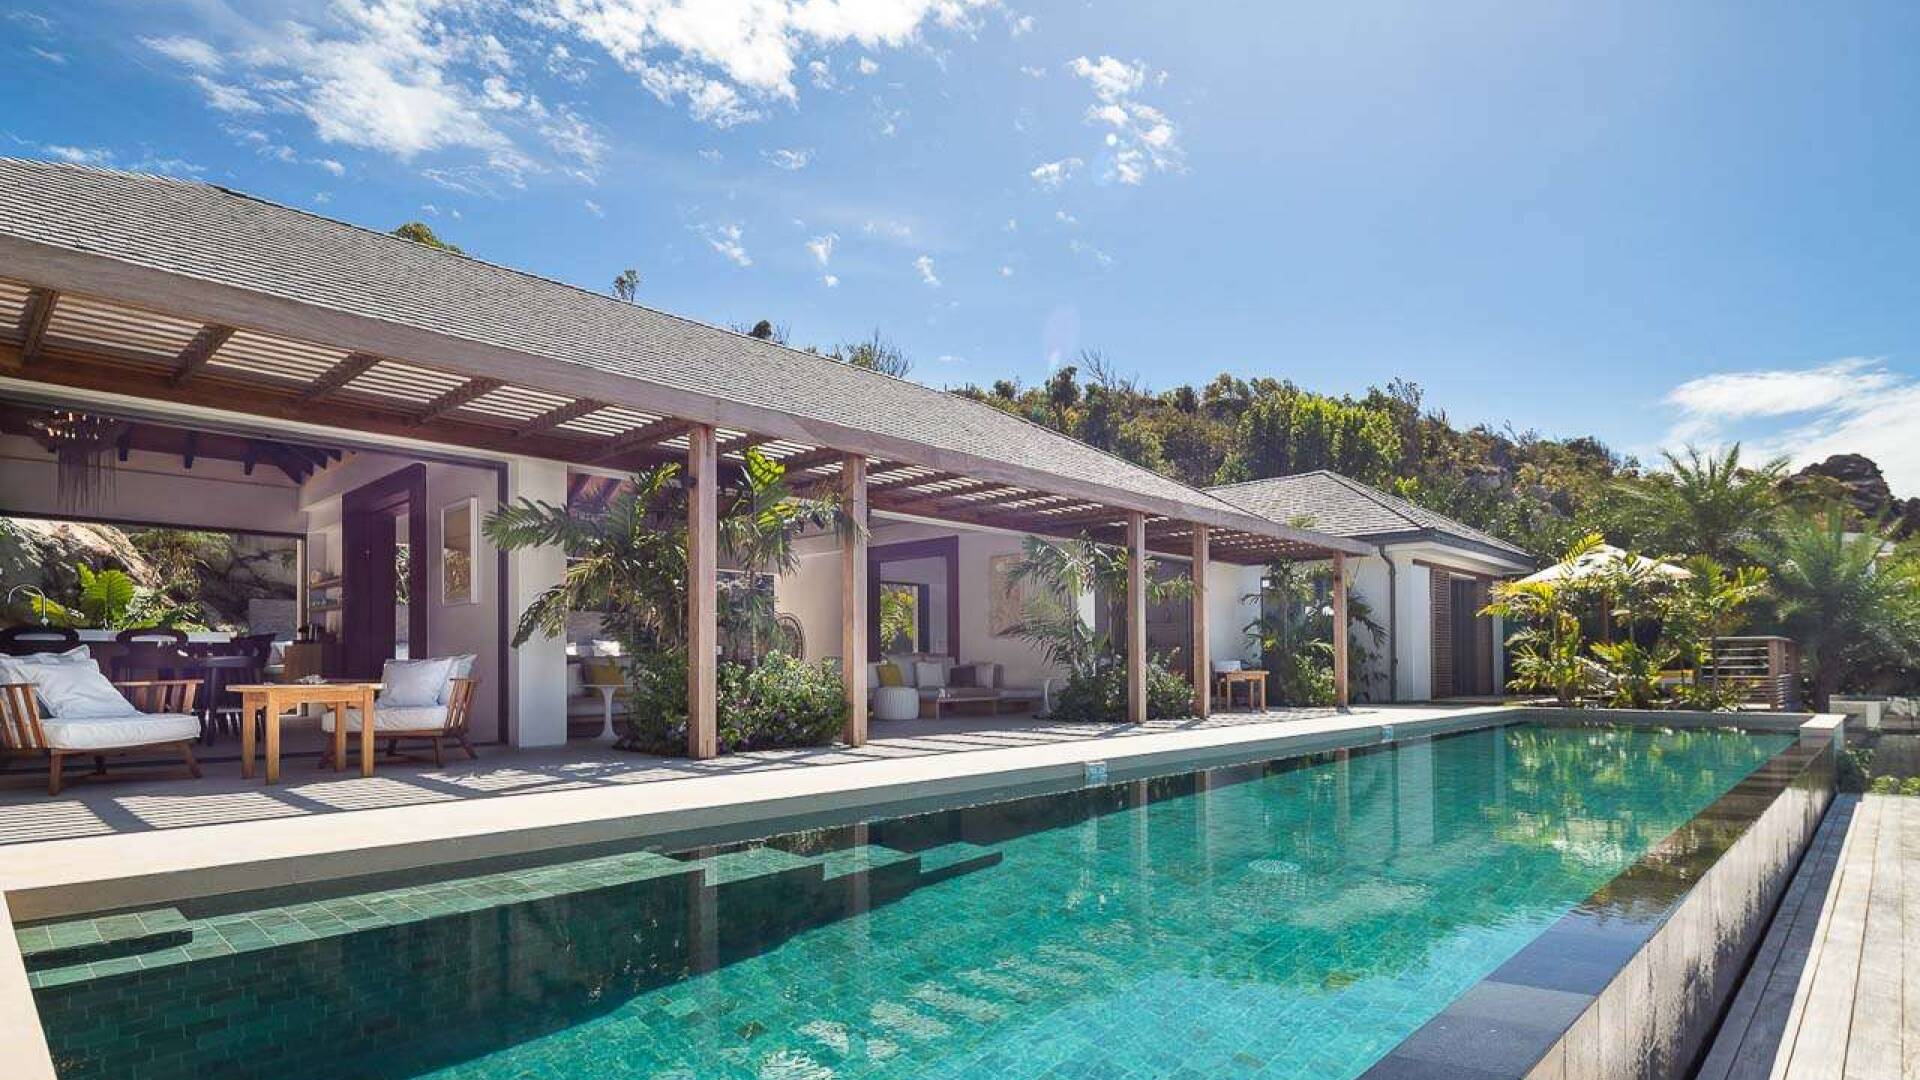 Villa Pool at WV LER, Colombier, St. Barthelemy